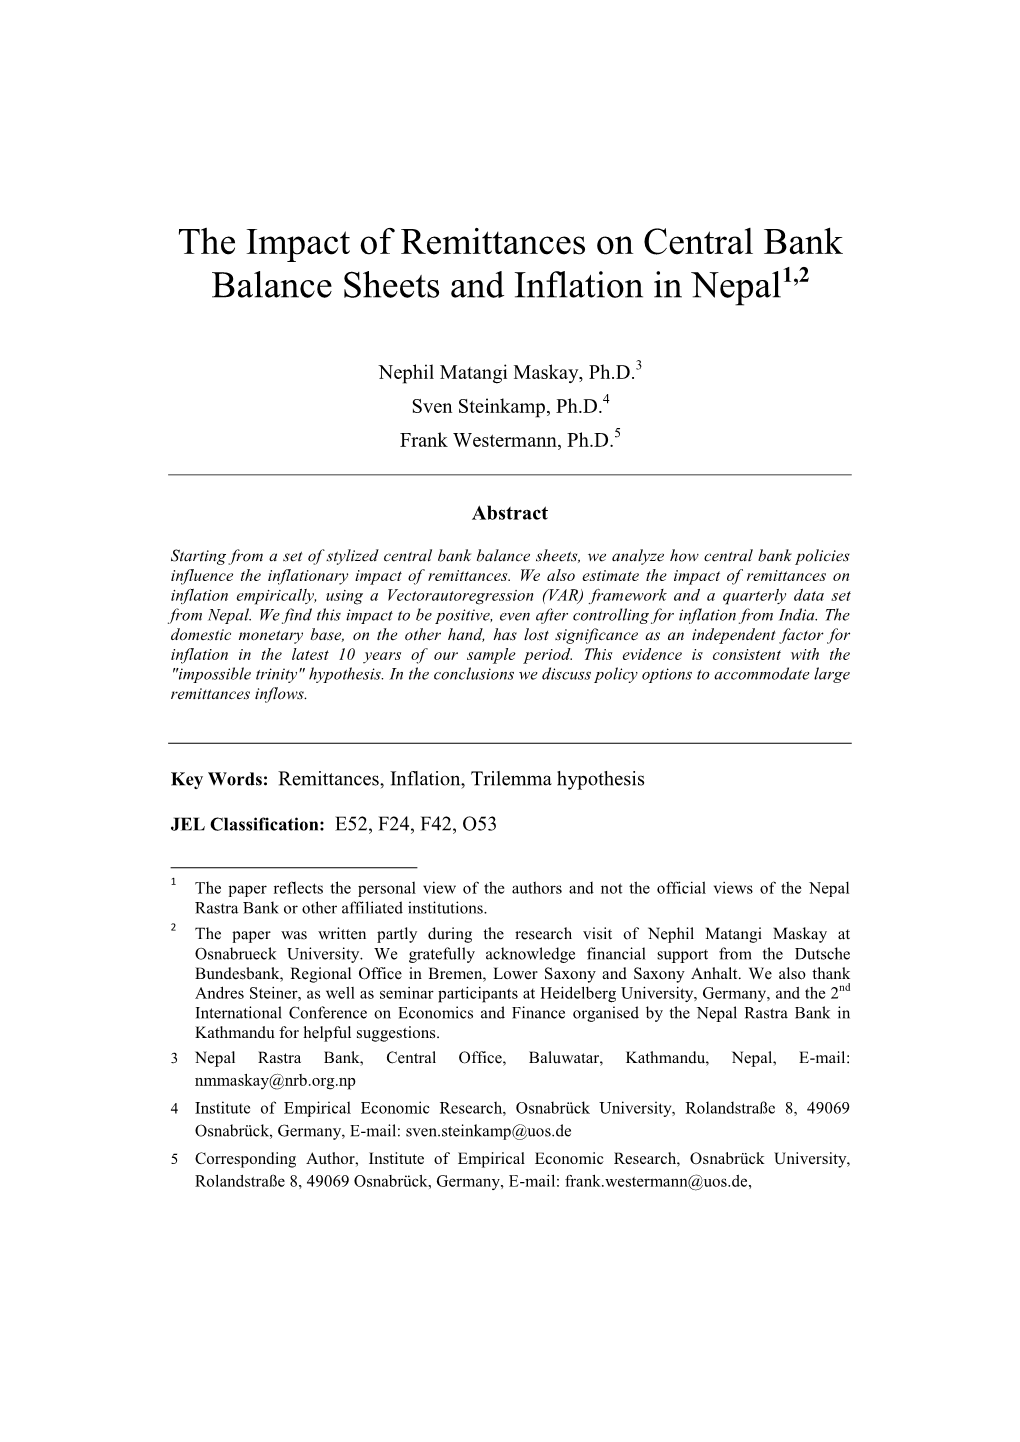 The Impact of Remittances on Central Bank Balance Sheets and Inflation in Nepal1,2